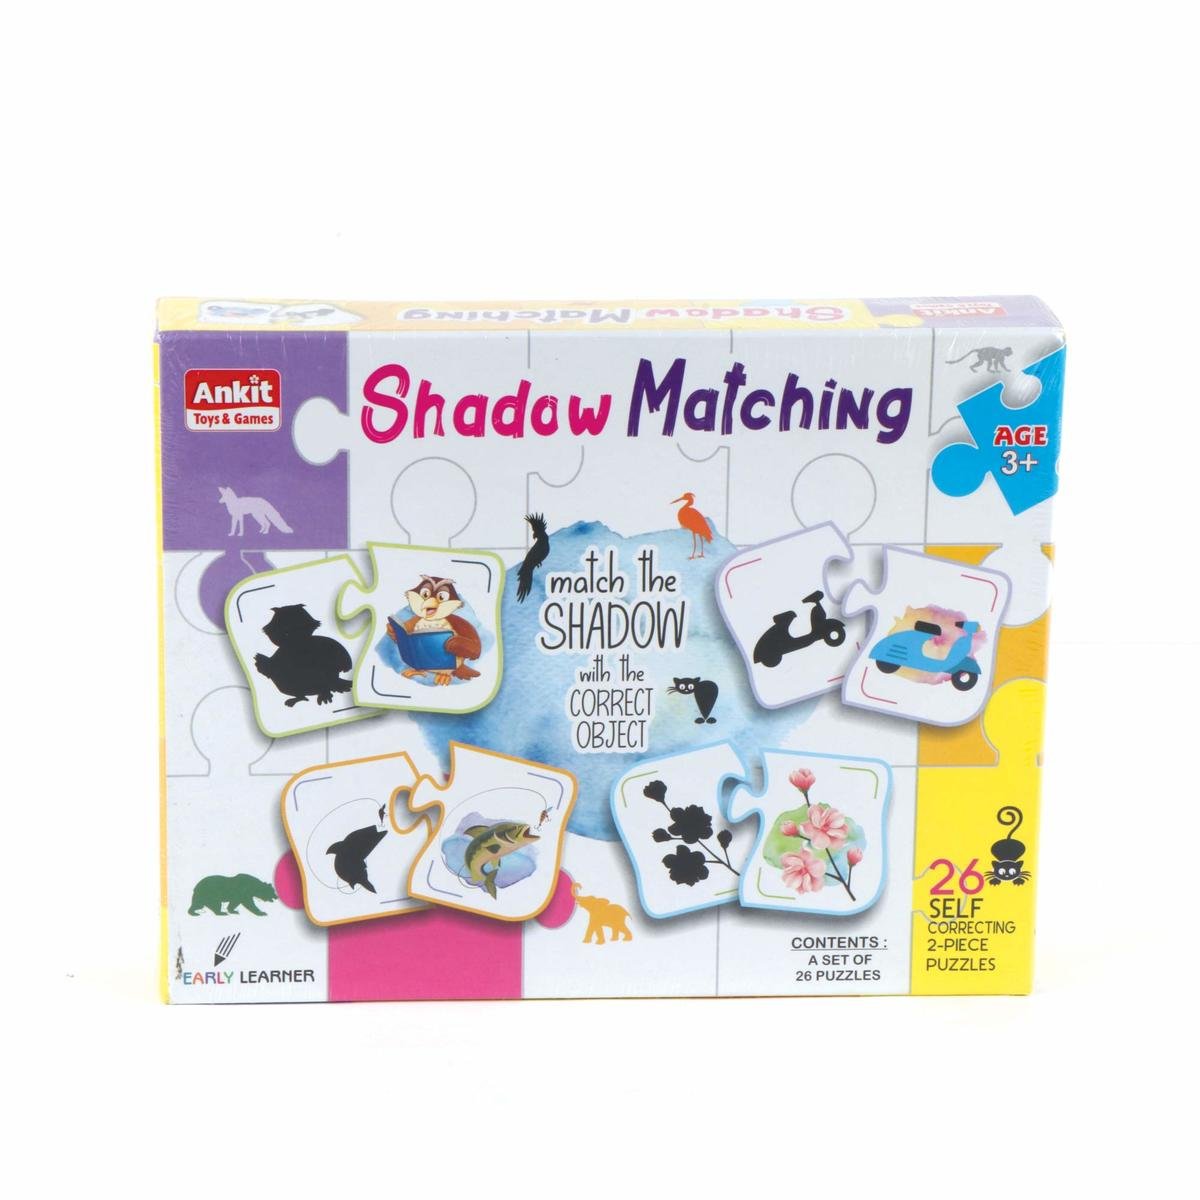 Ankit Early Learner Shadow Matching 26-Self Correcting 2-Piece Puzzles